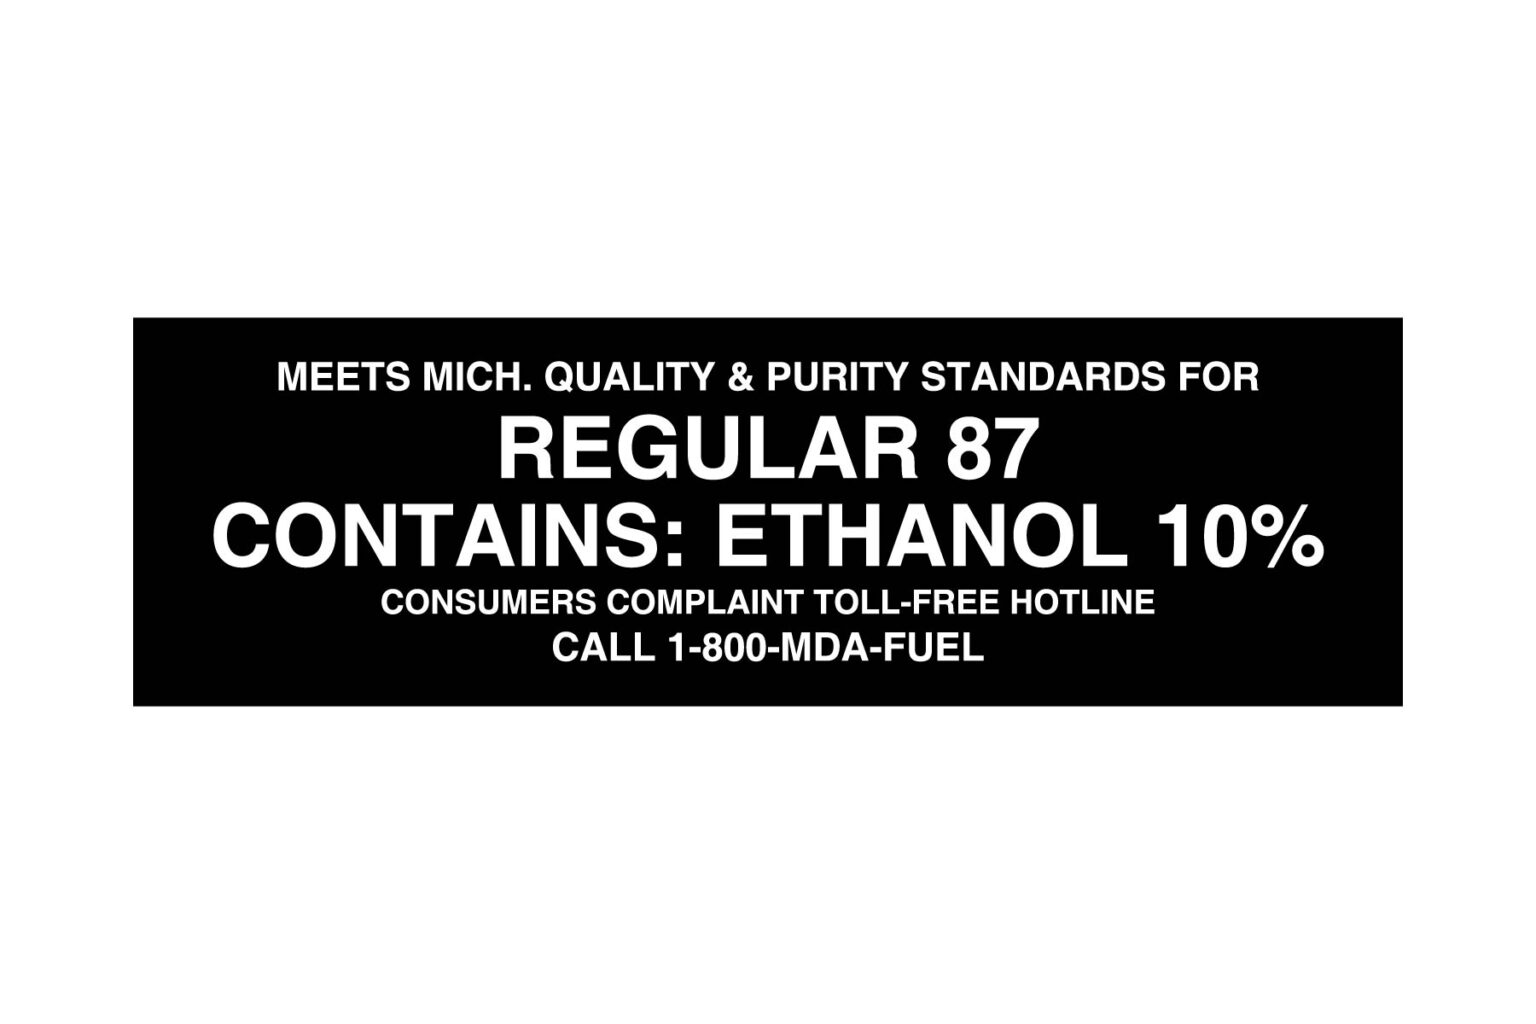 Meets Michigan Quality & Purity Standards for Regular 87 Contains: Ethanol 10% Decal